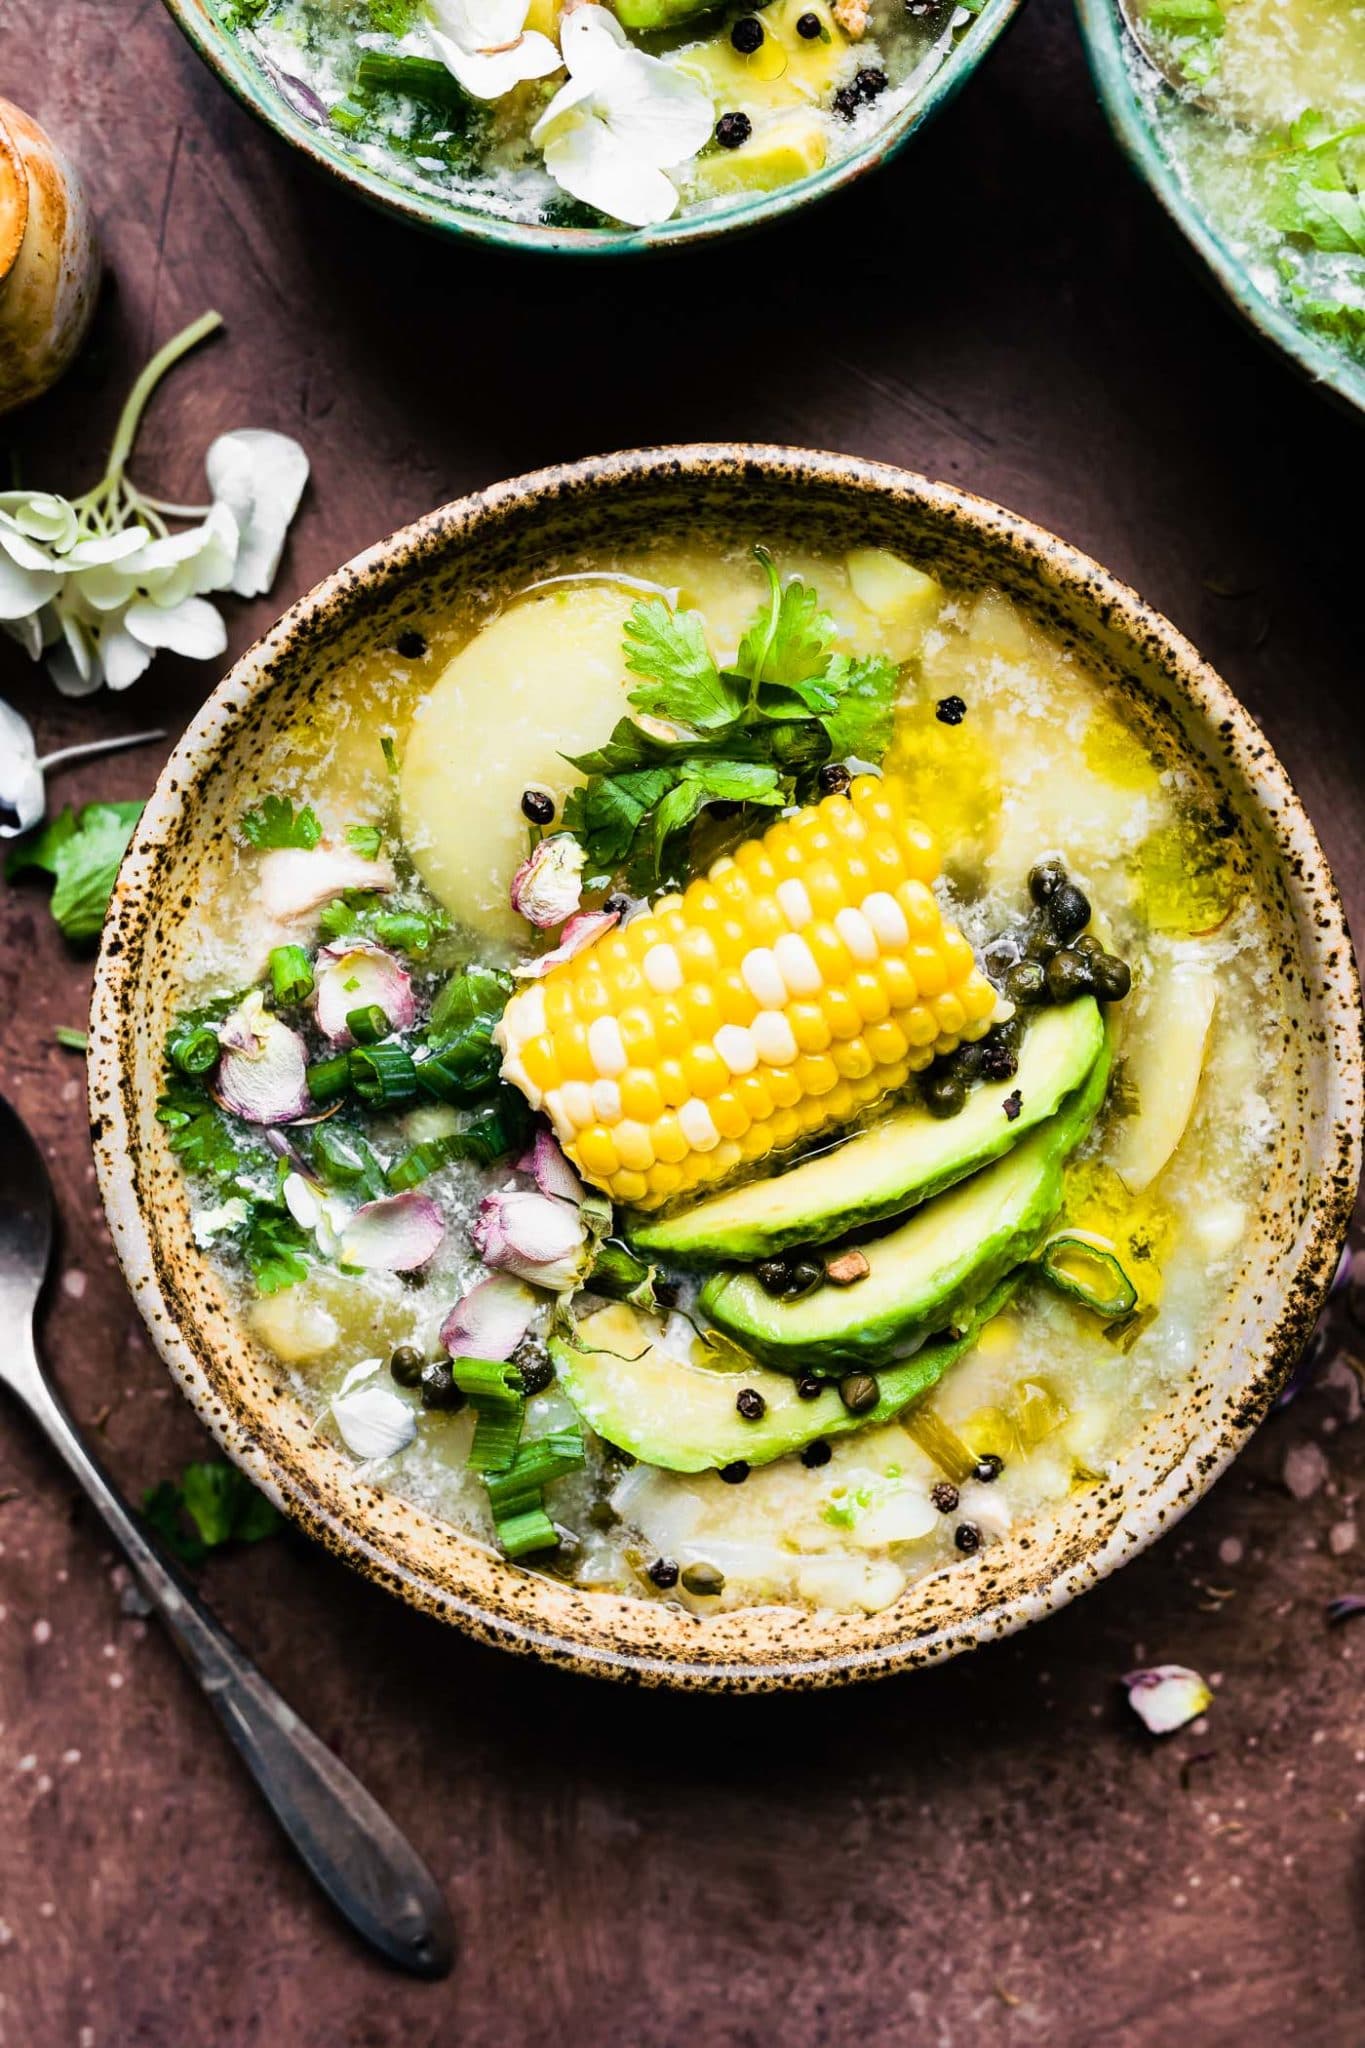 Instant pot chicken and potato soup with corn on the cob, avocado slices, scallions, and cilantro